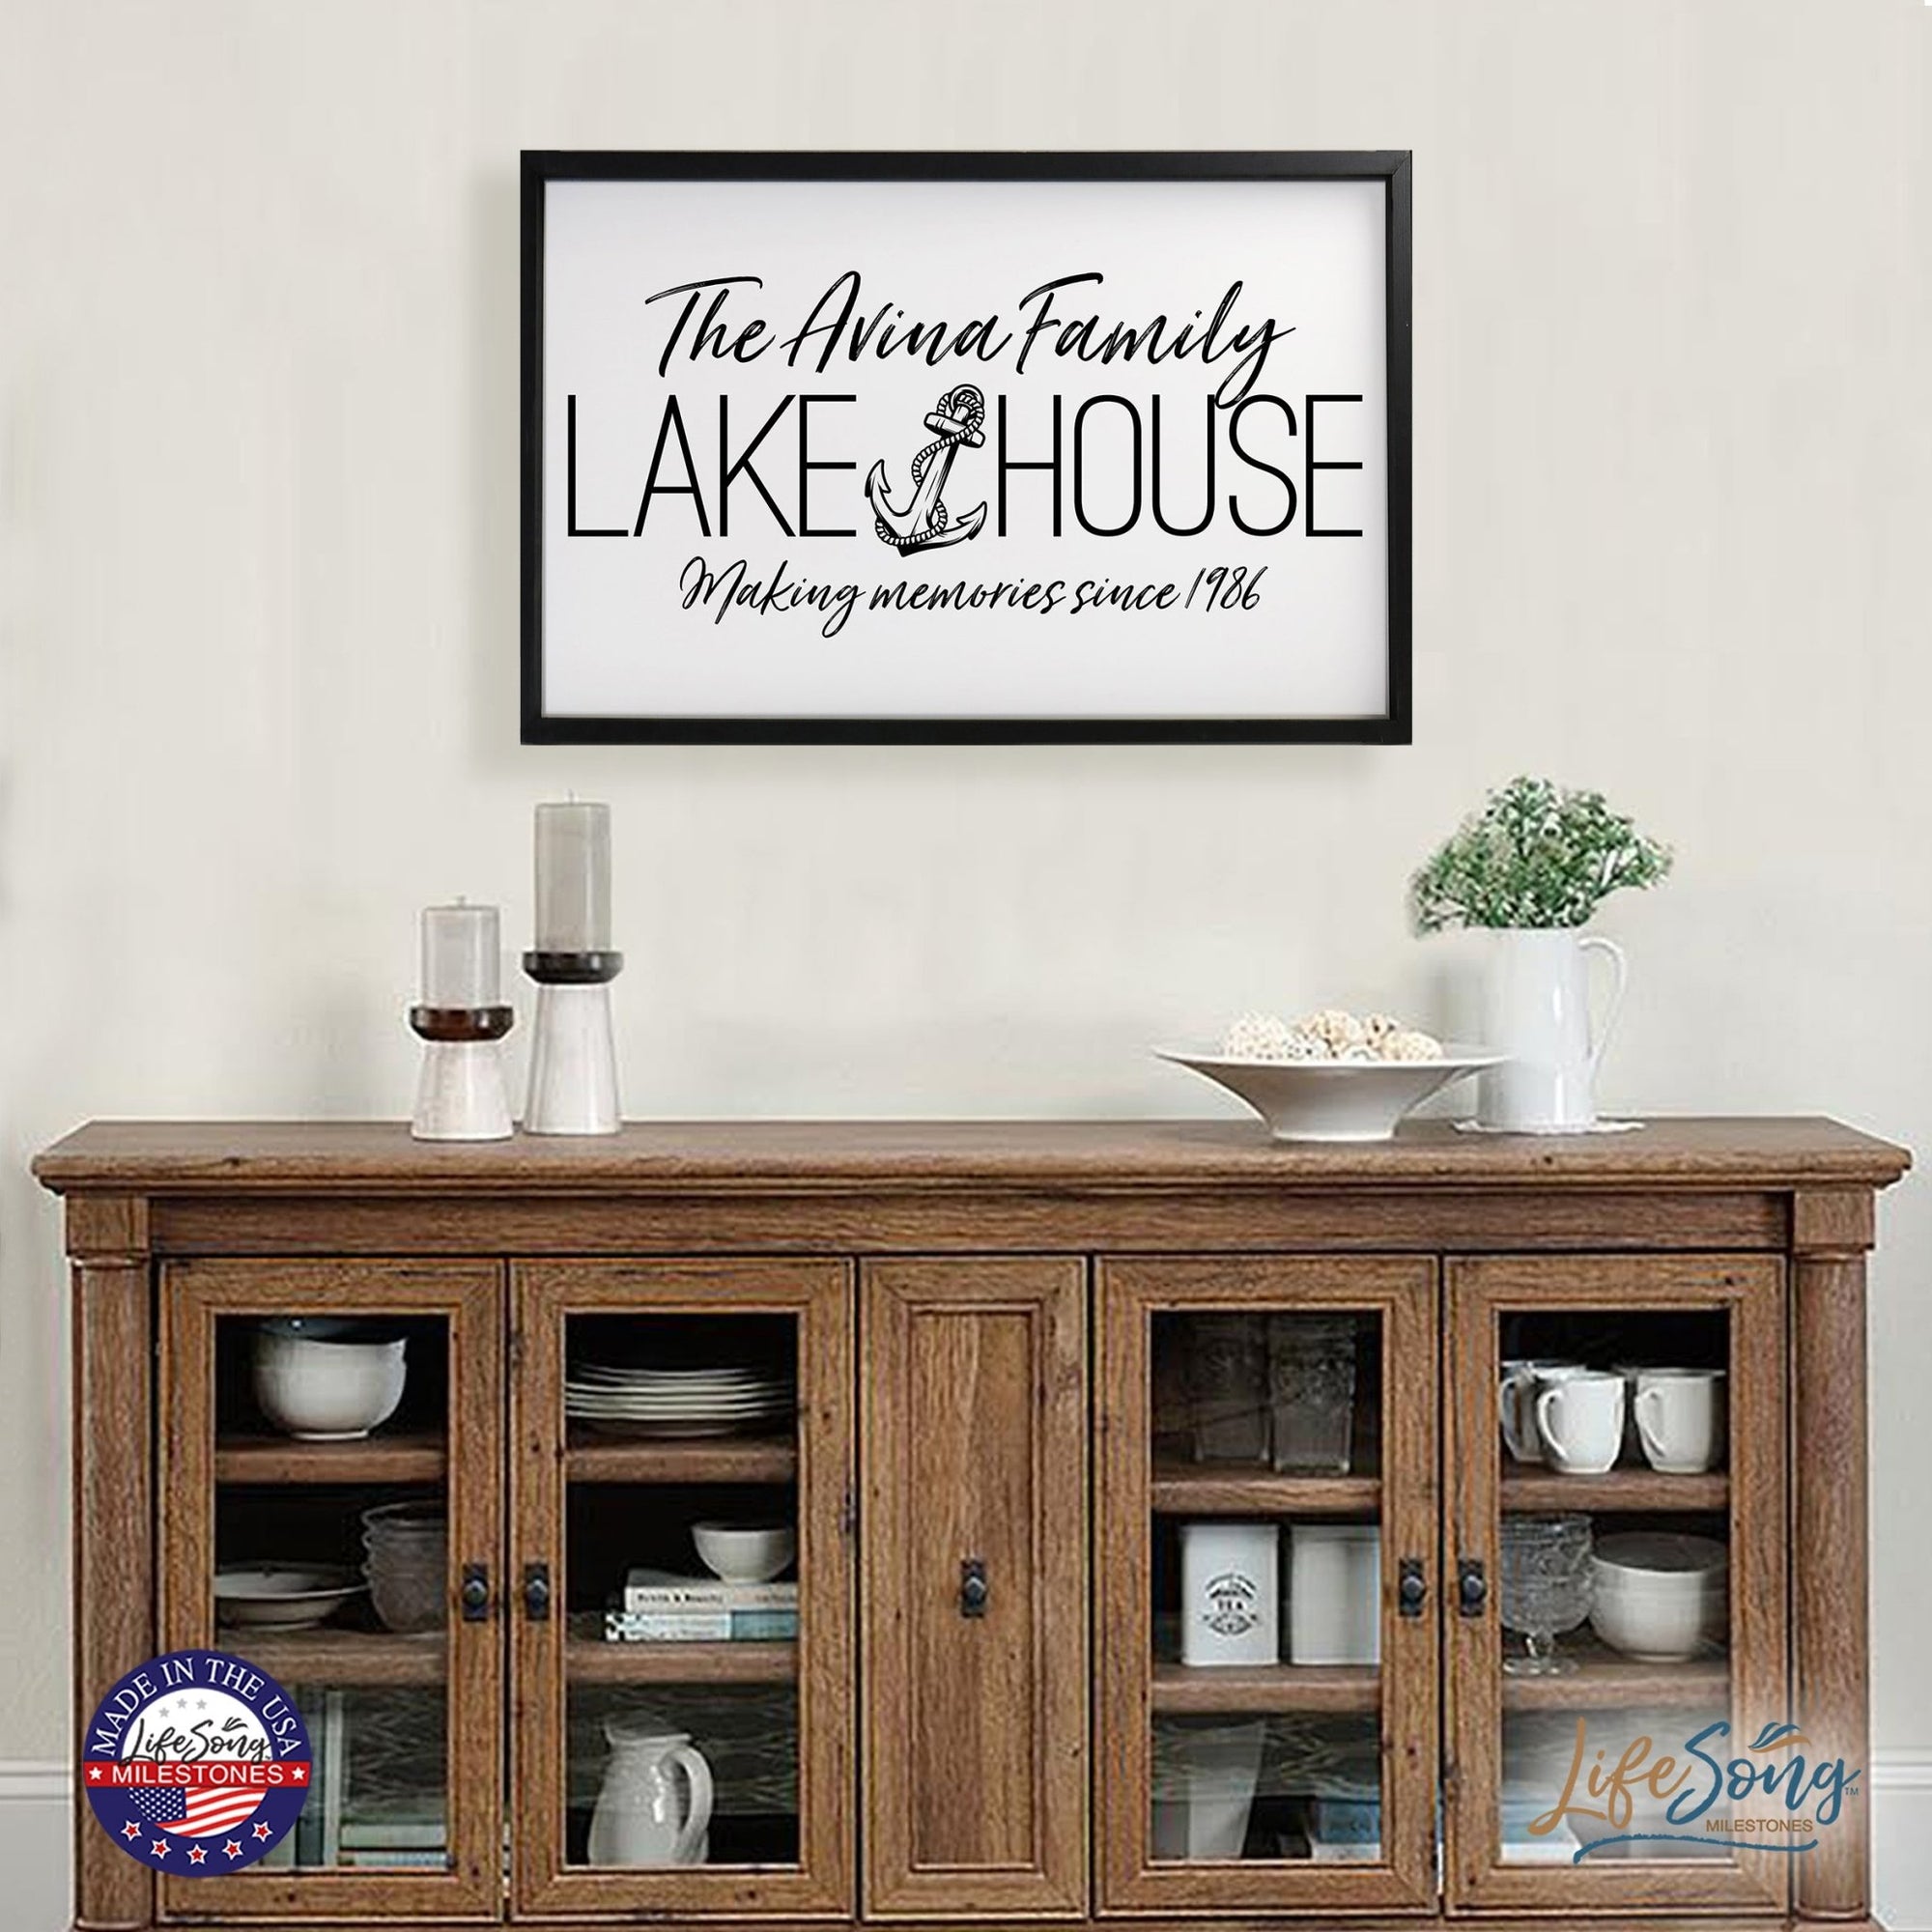 Inspirational Personalized Framed Shadow Box 25x36 - Lake House (Anchor) - LifeSong Milestones